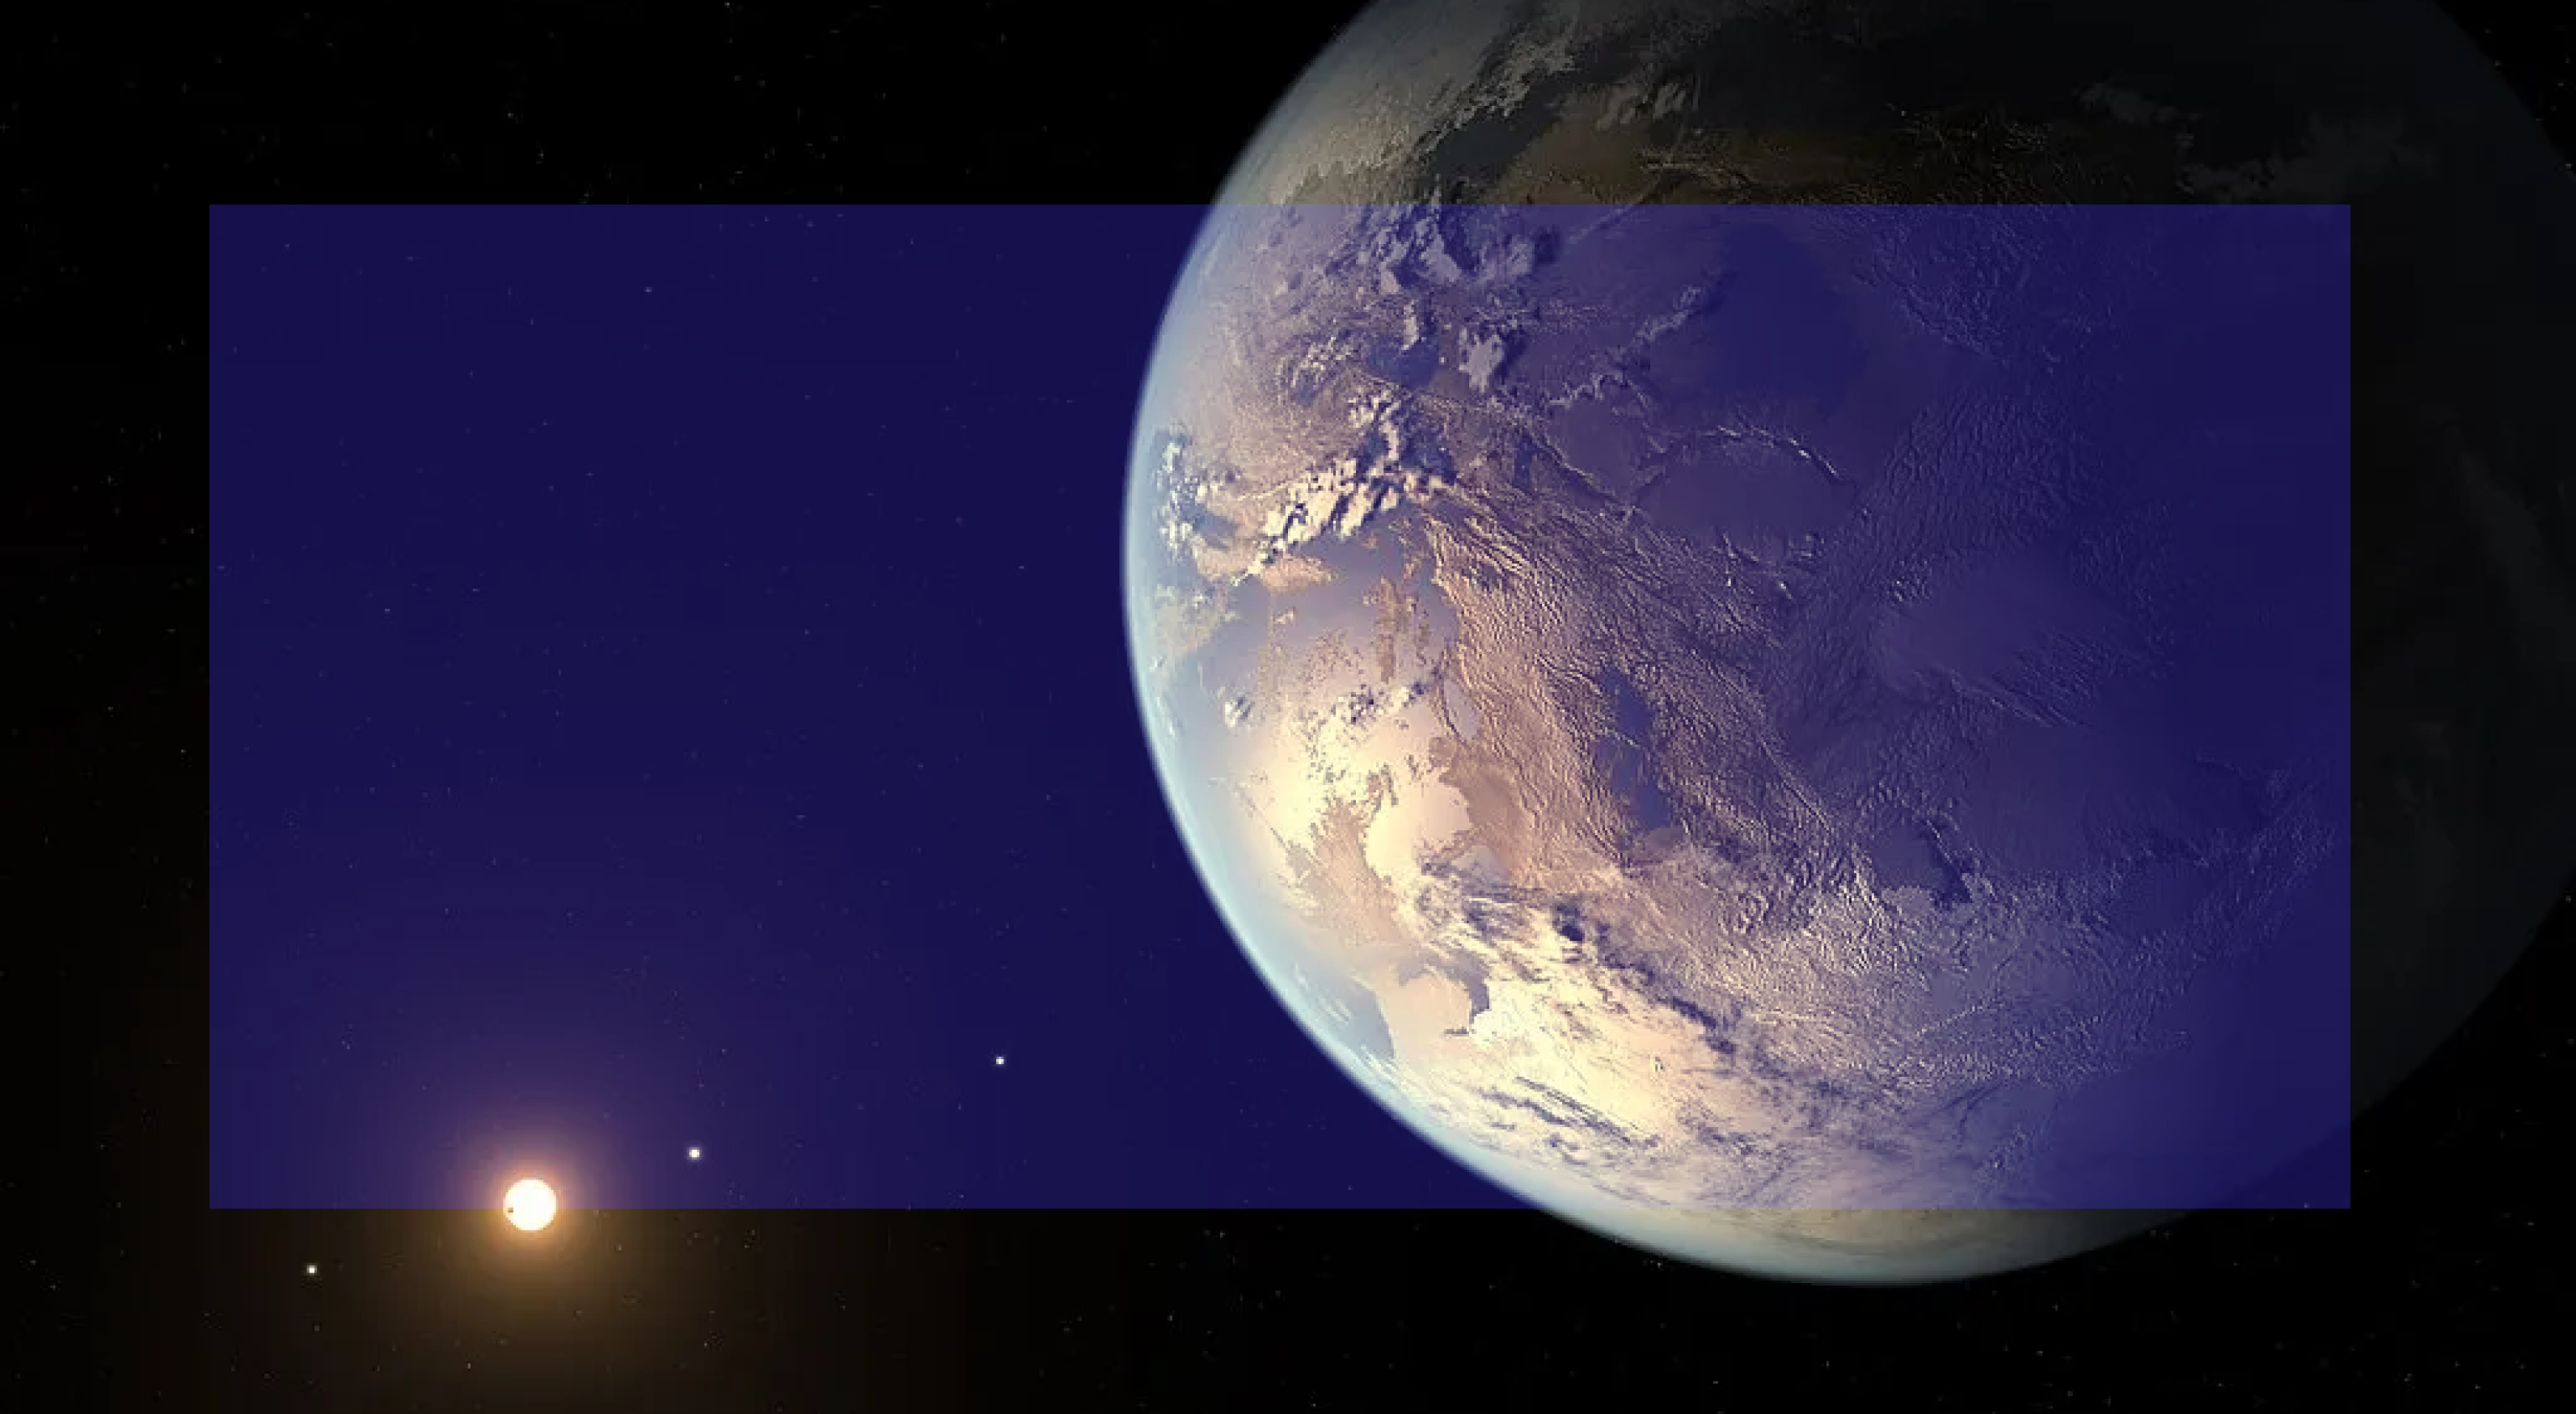 An image of a planet with a moon, highlighting one of the first living worlds discovered.